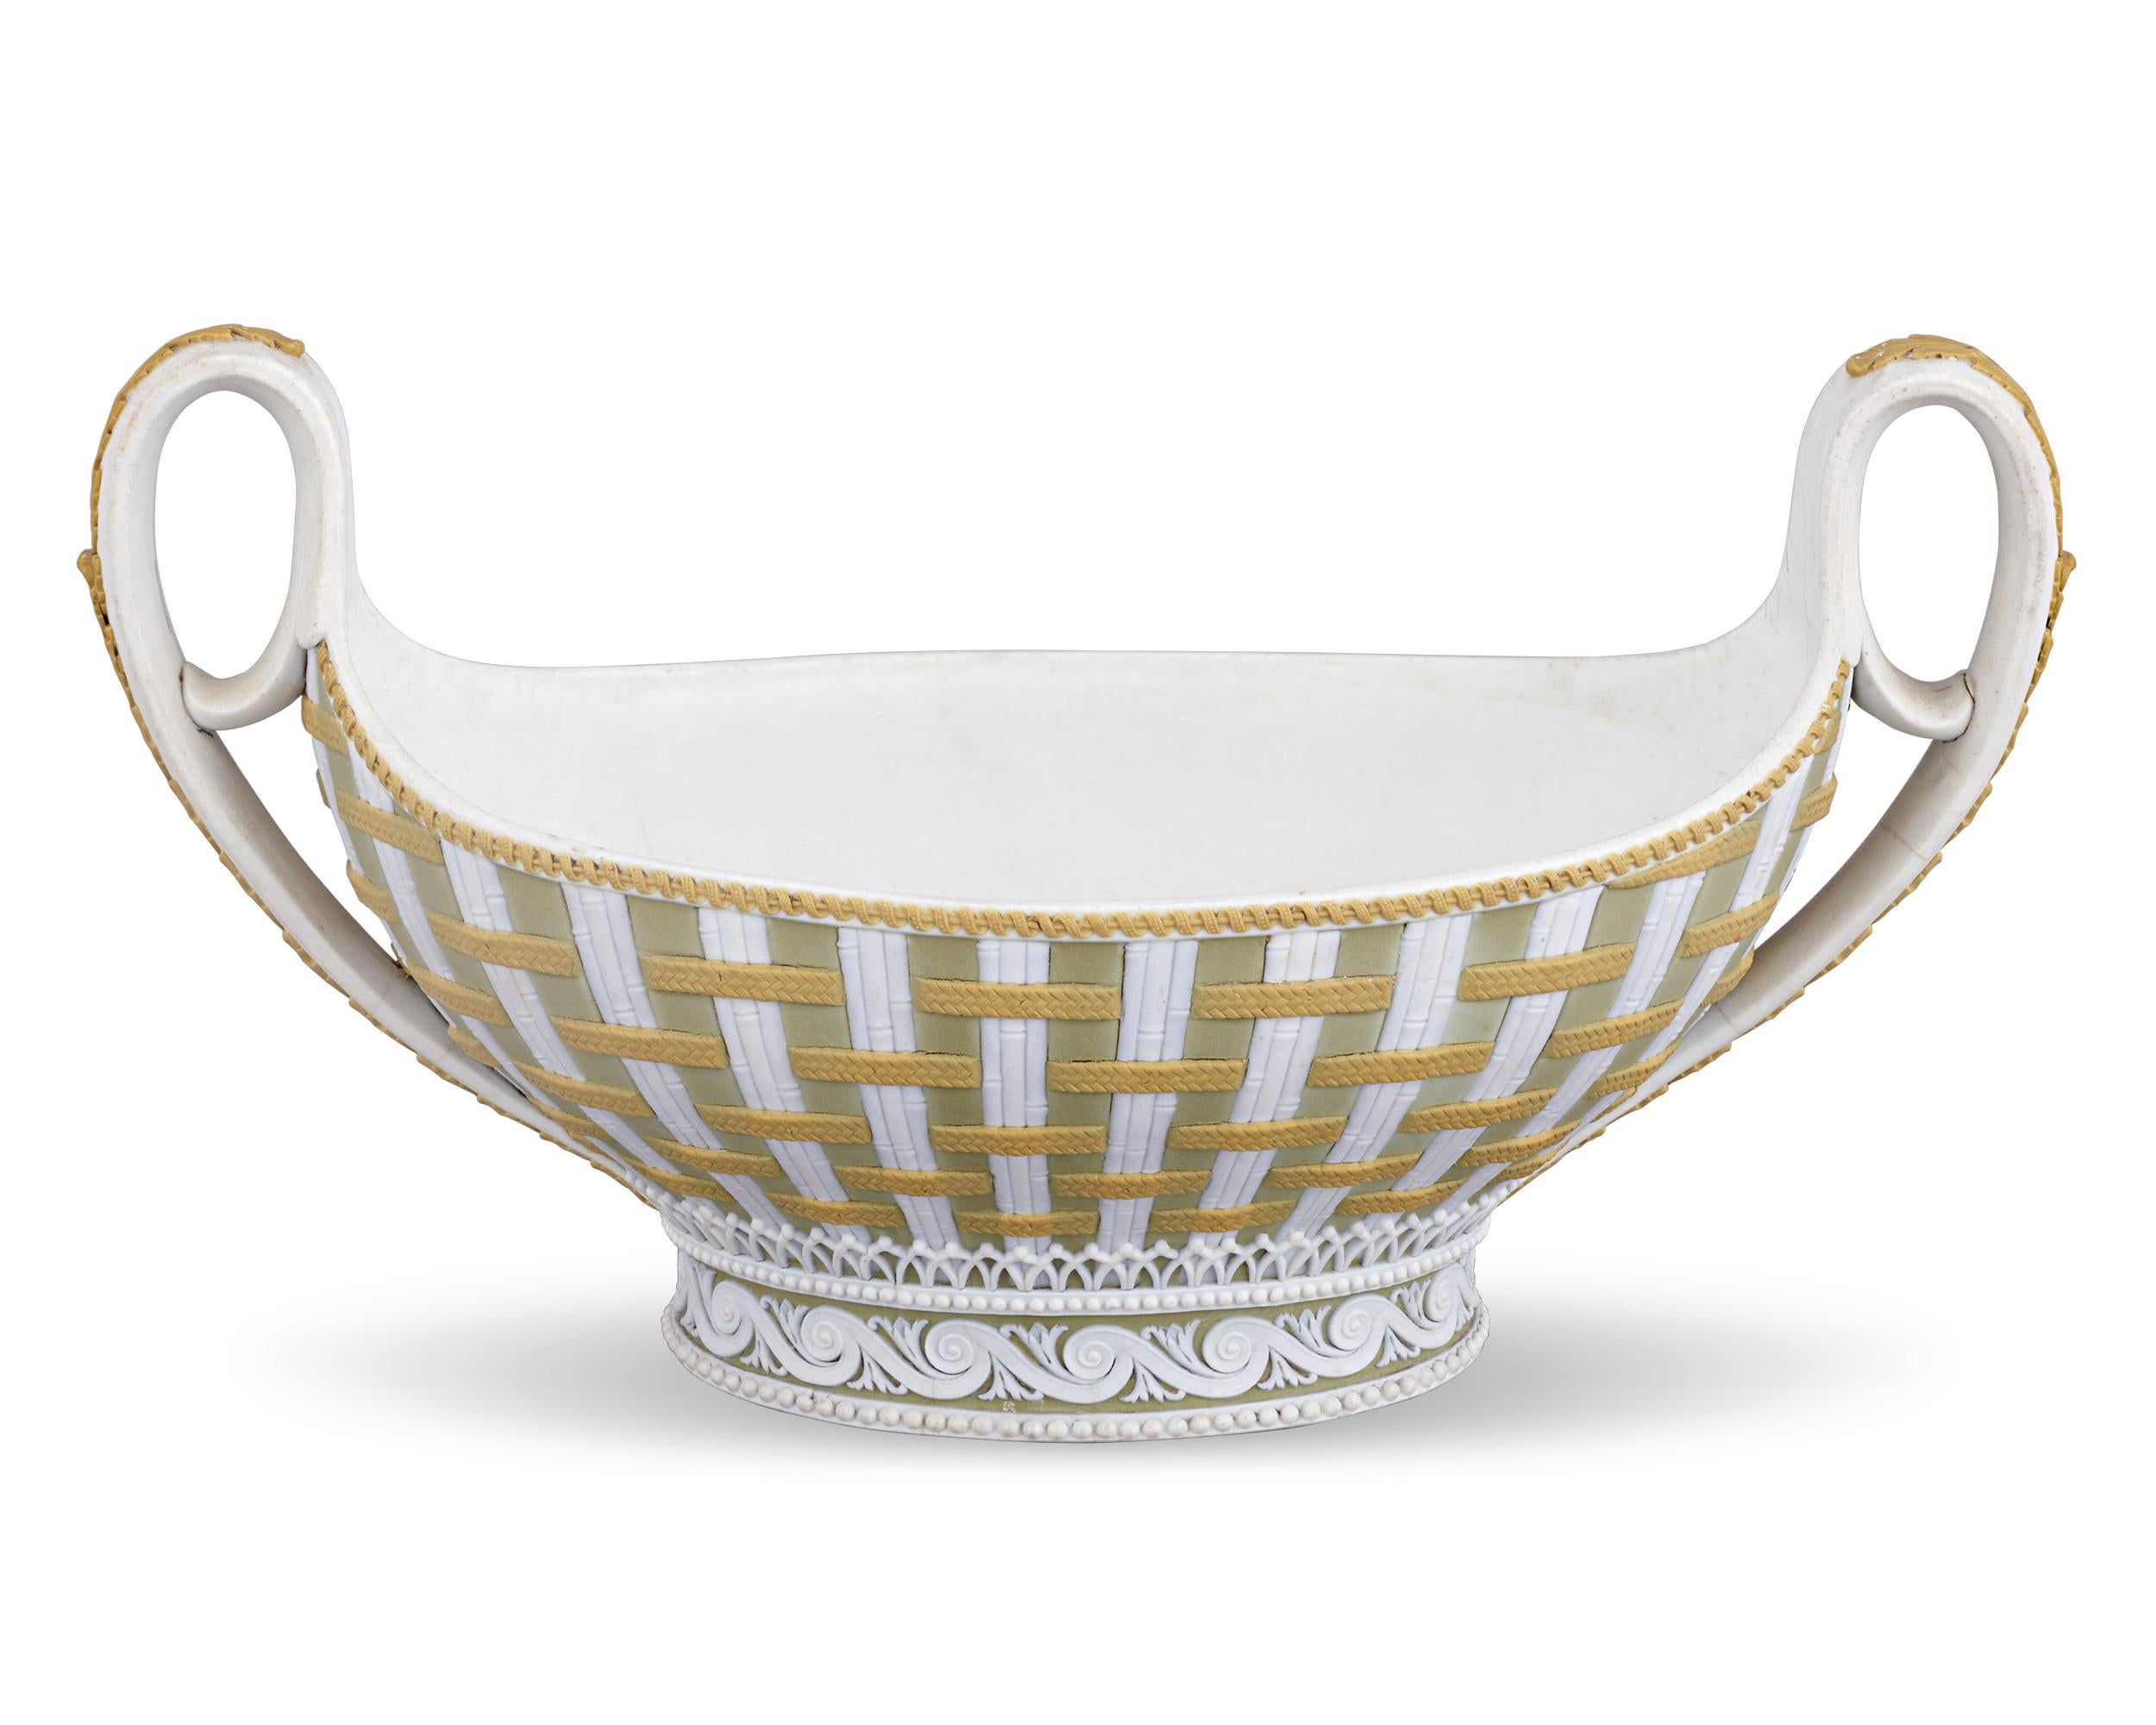 Wedgwood Tricolor Sauceboat In Excellent Condition For Sale In New Orleans, LA